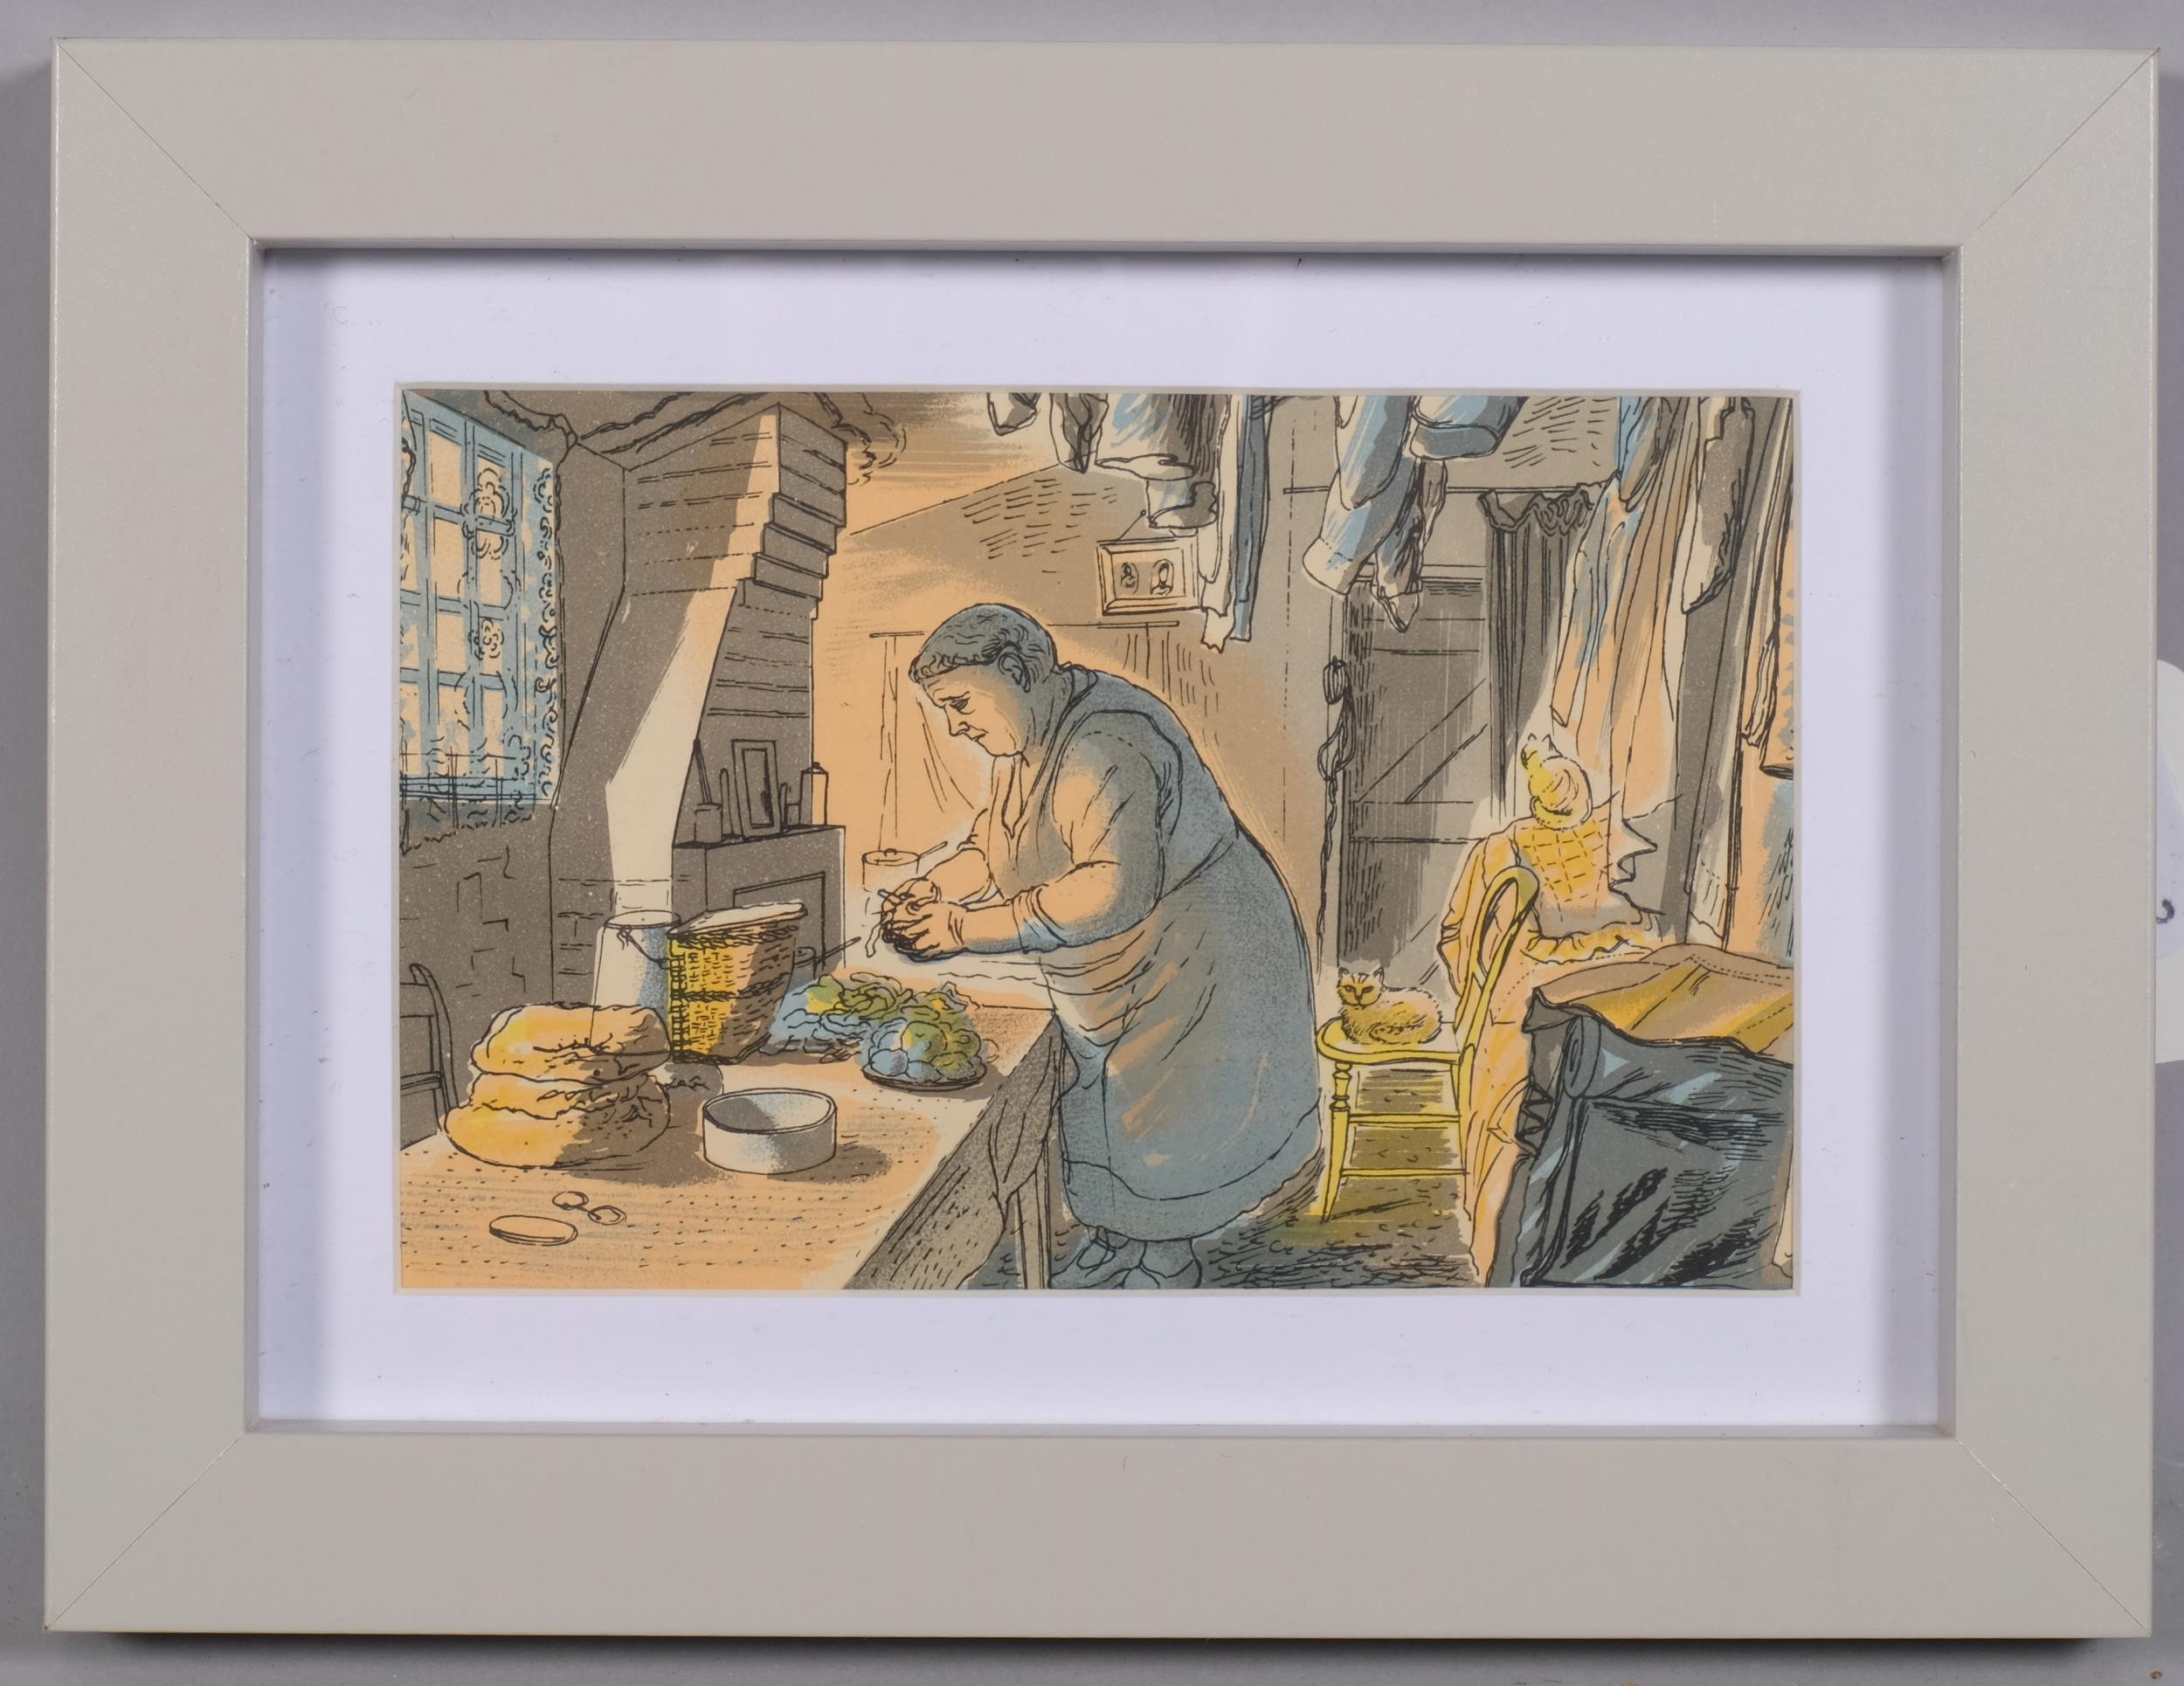 Edward Bawden (1903 - 1989), Peeling Potatoes/The Child Welfare Clinic, colour lithograph, published